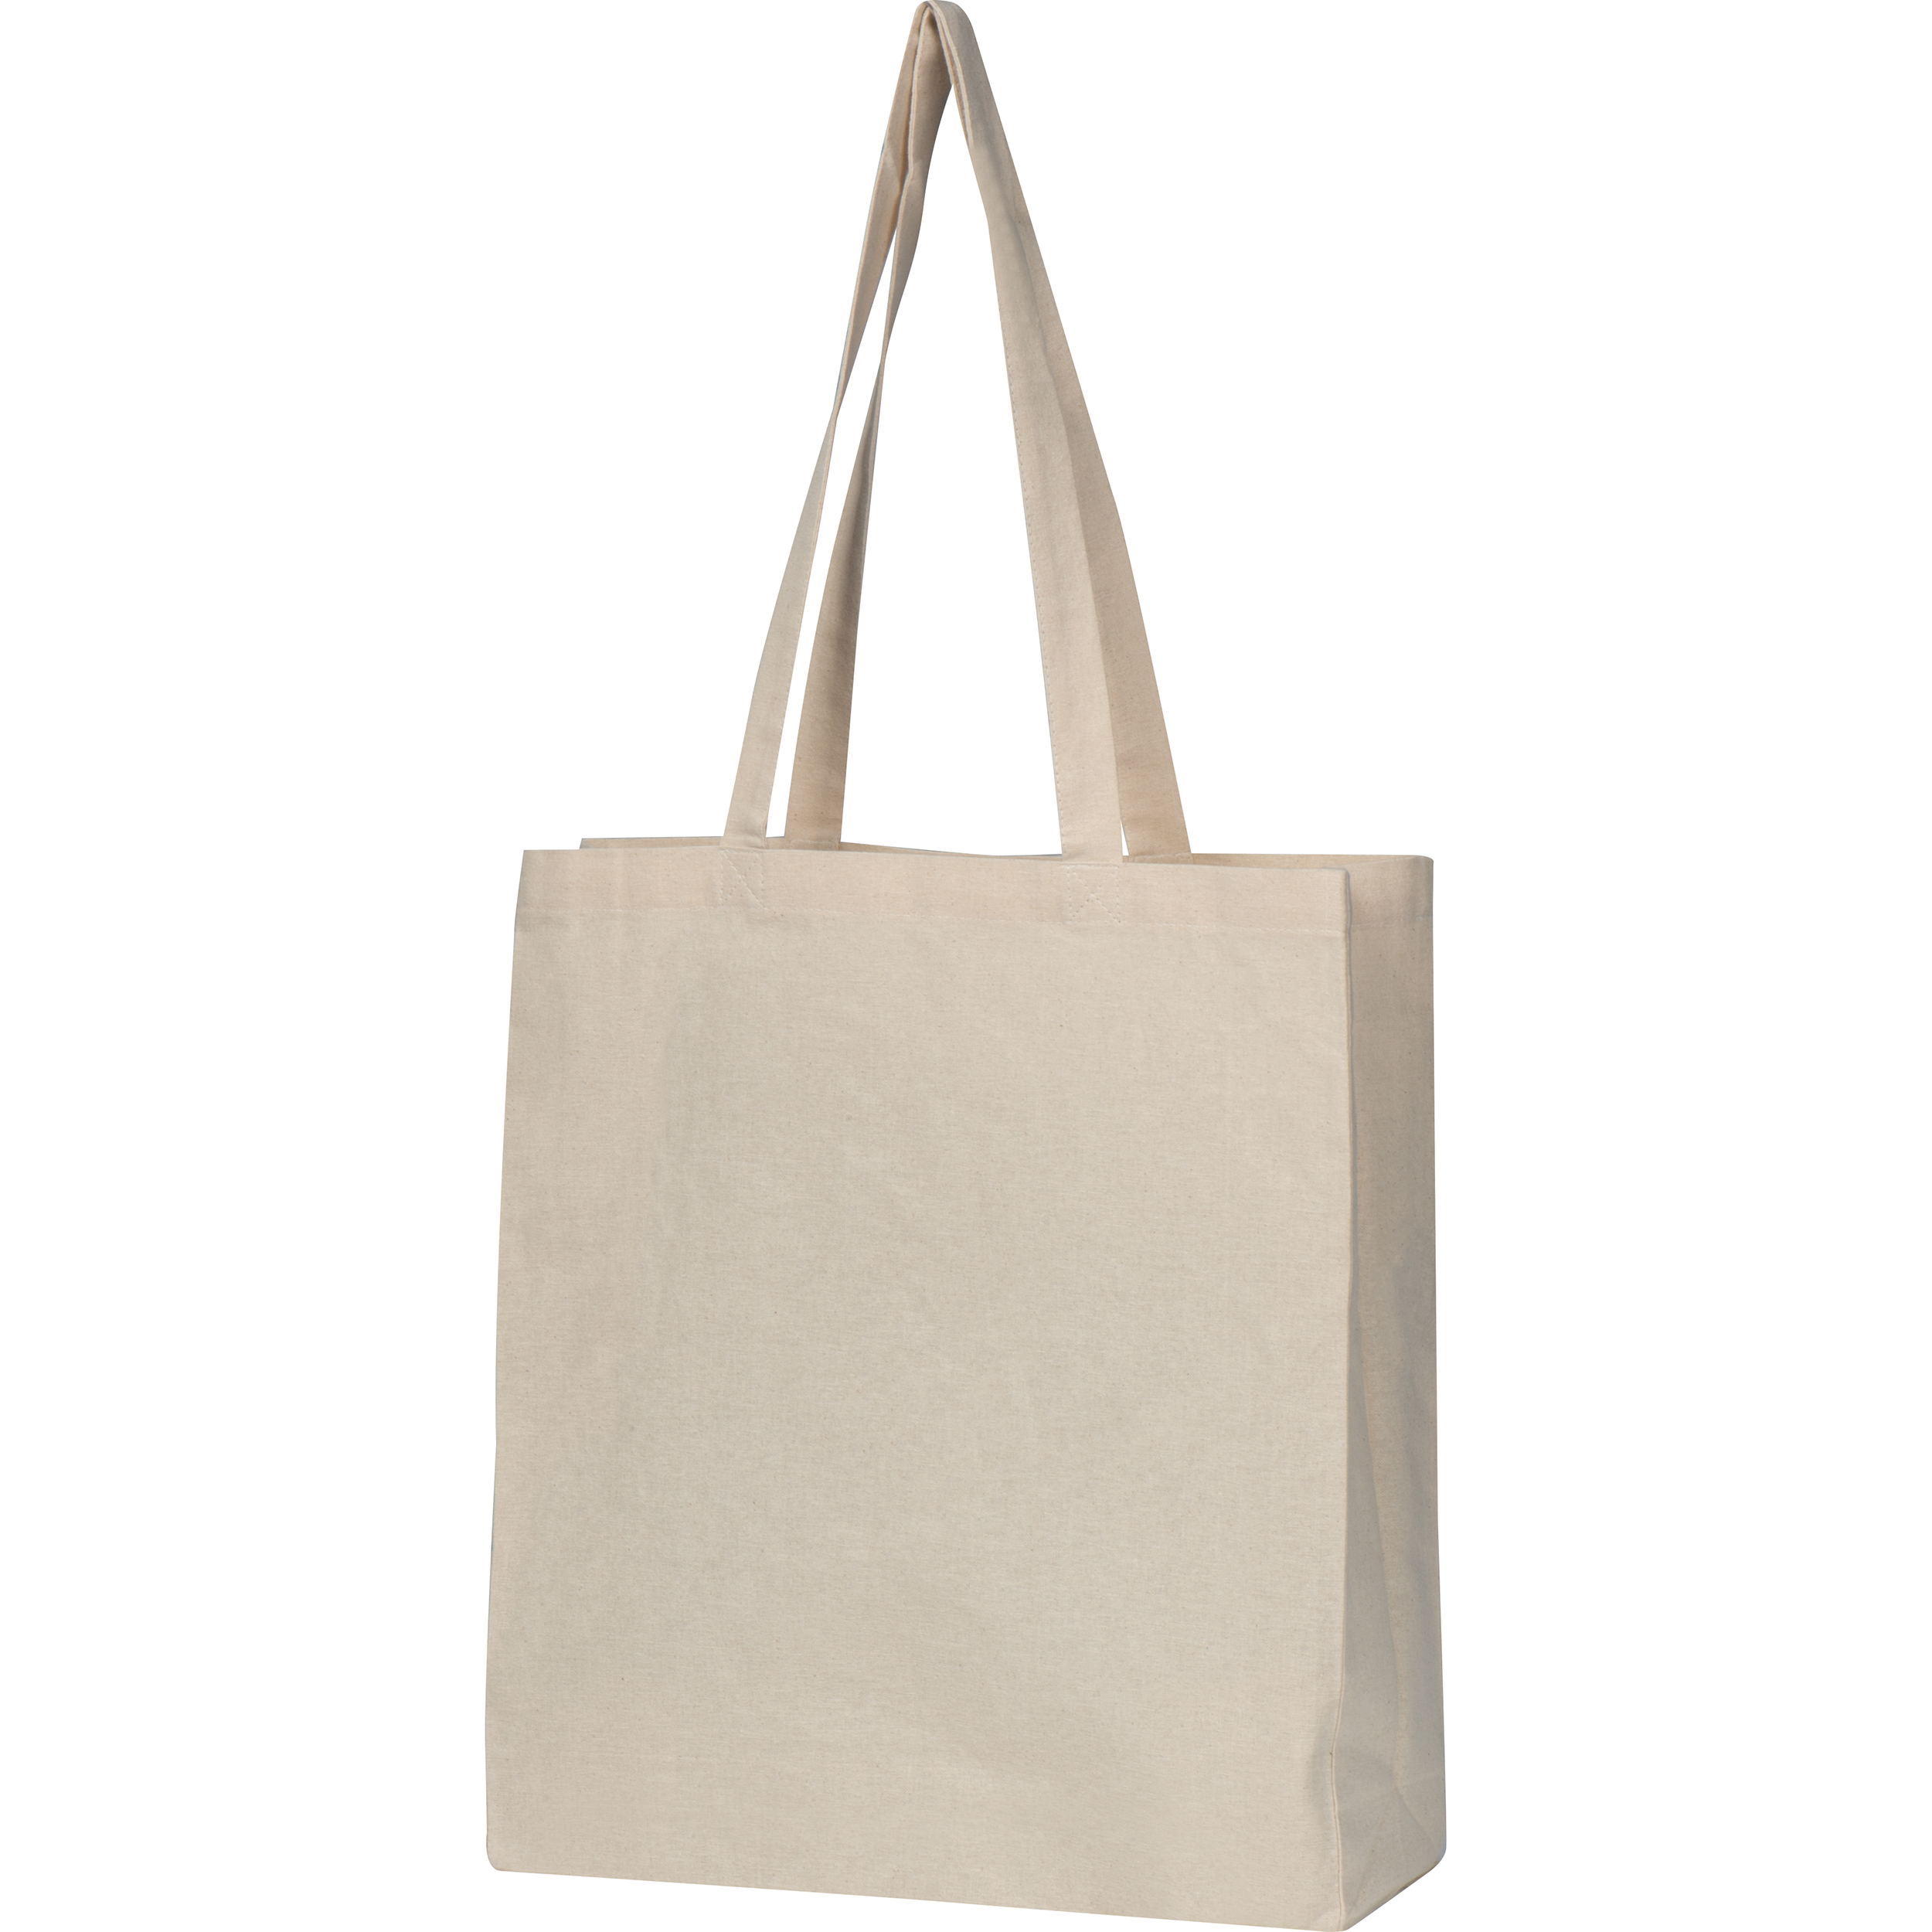 This is a bag made from organic cotton that is certified by the Global Organic Textile Standard (GOTS) - Morborne - Blackbrook